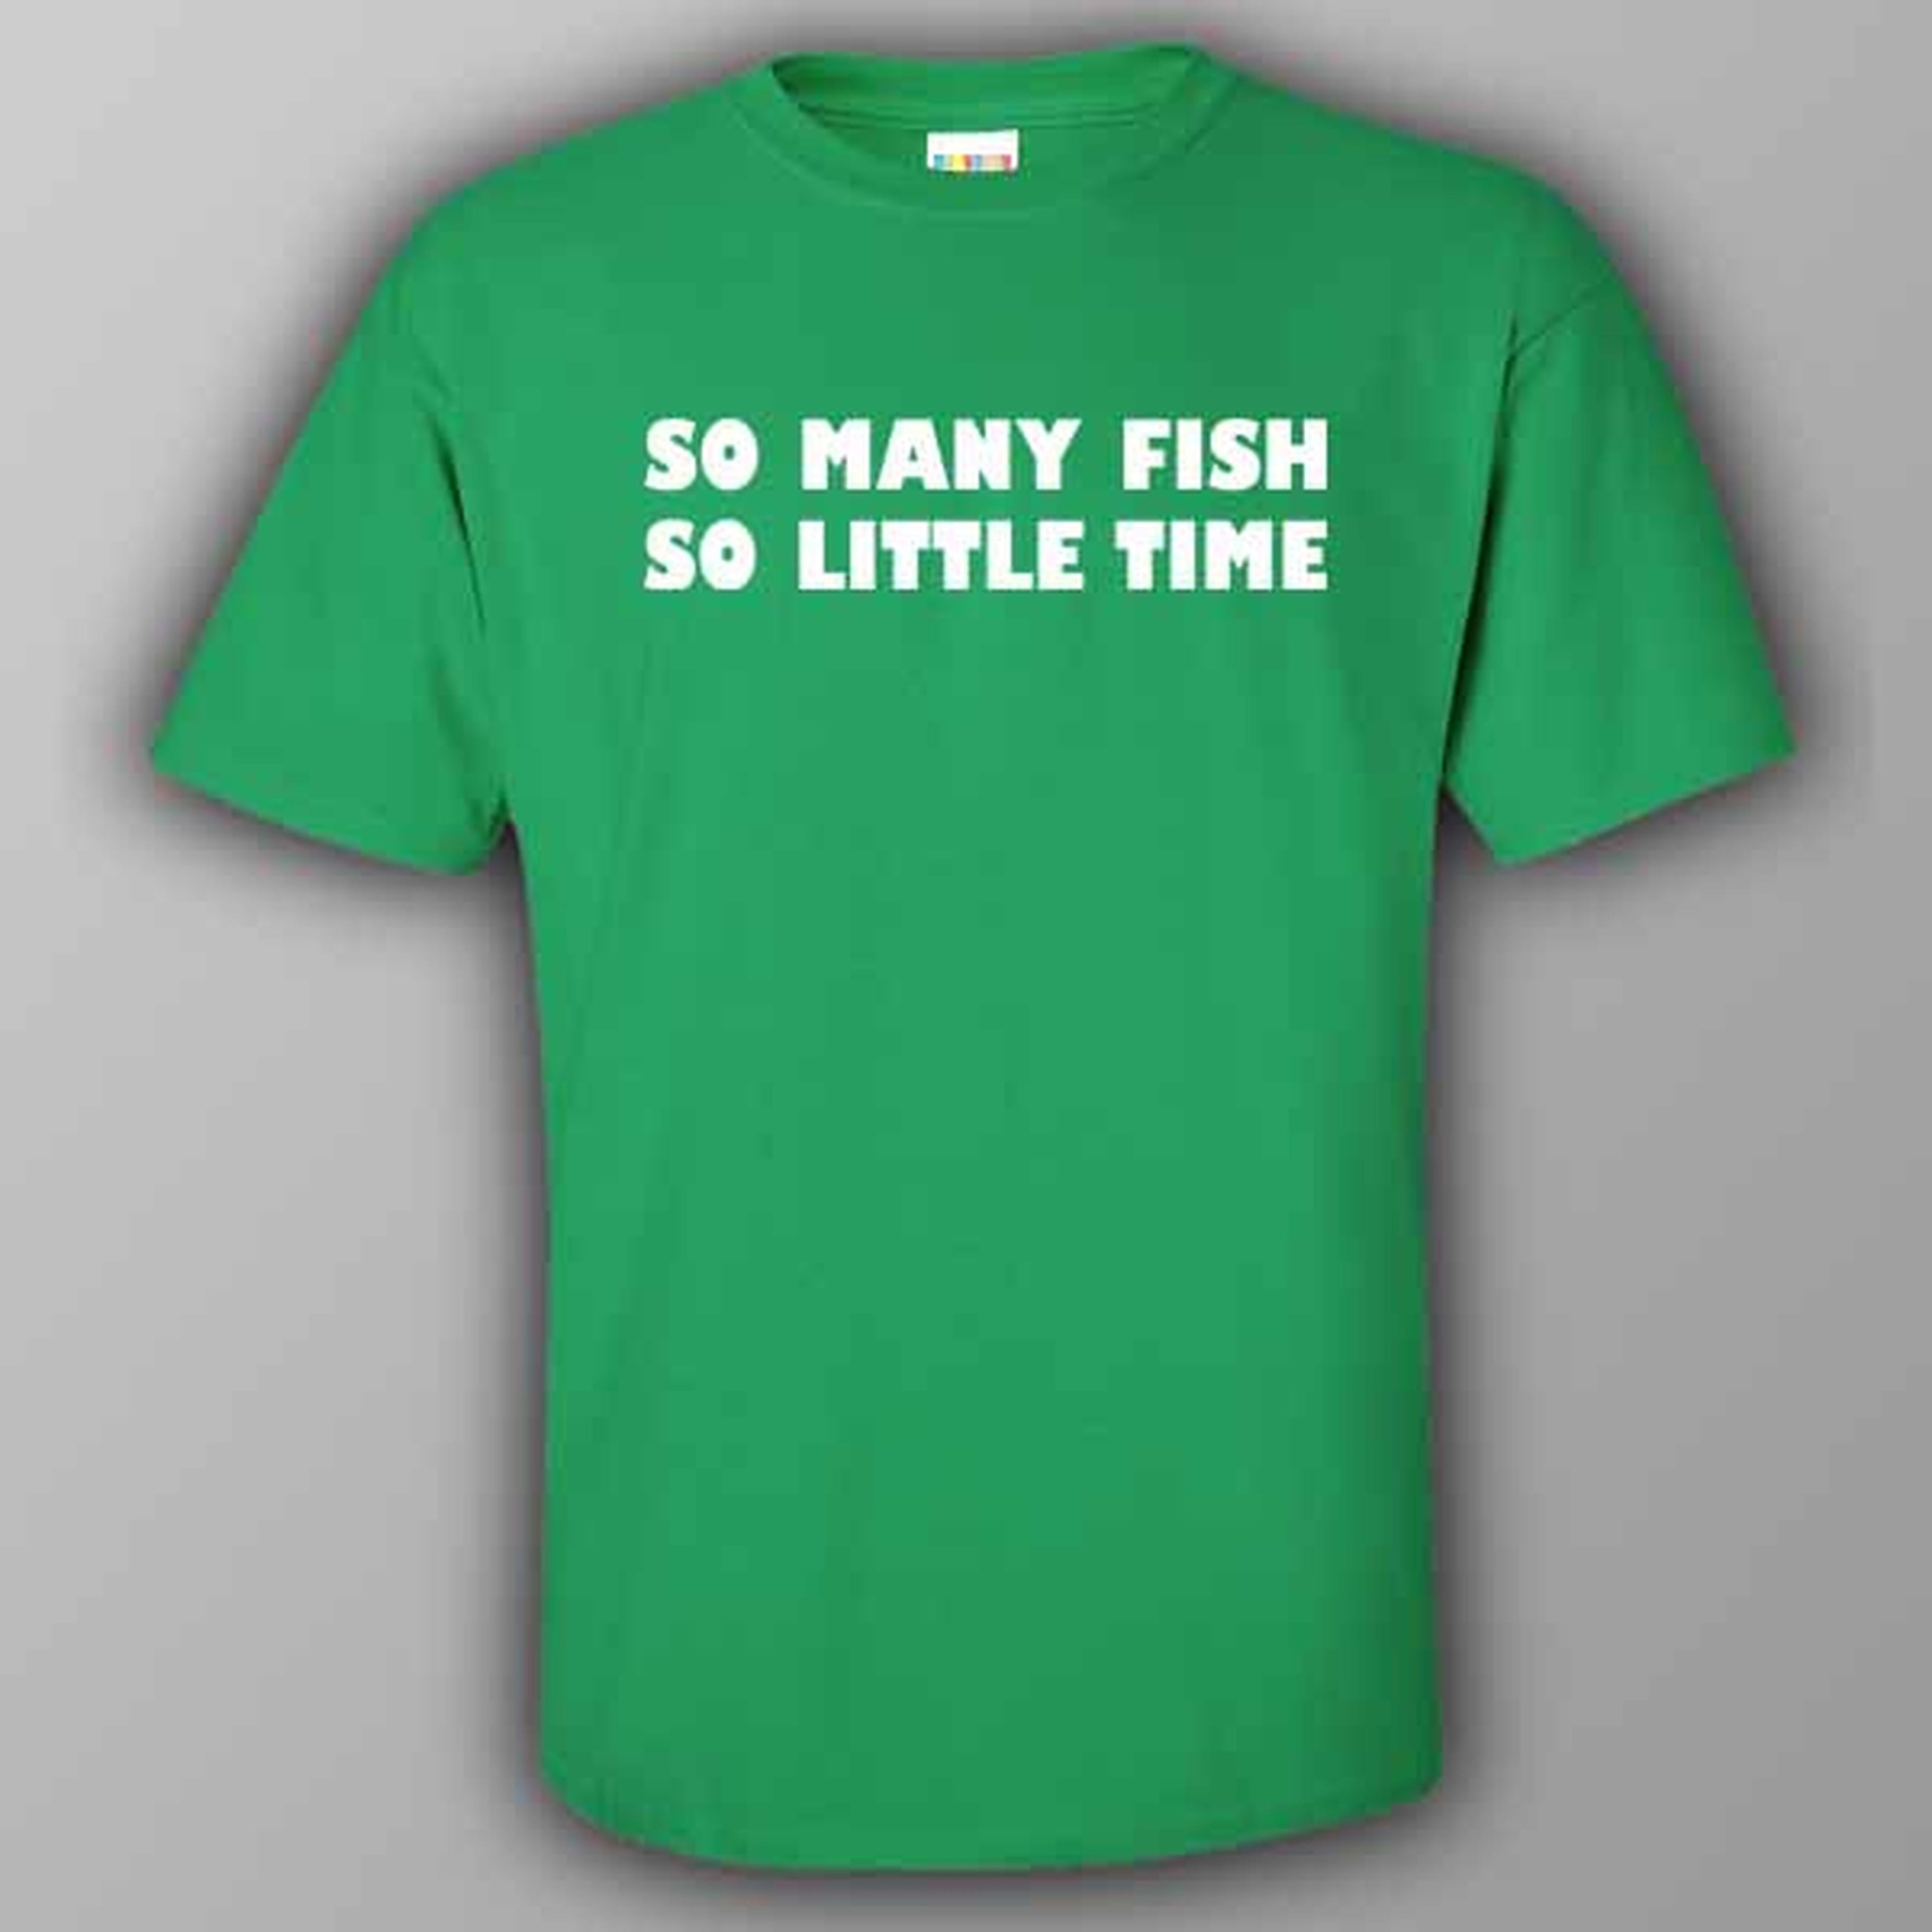 So many fish, so little time - T-shirt